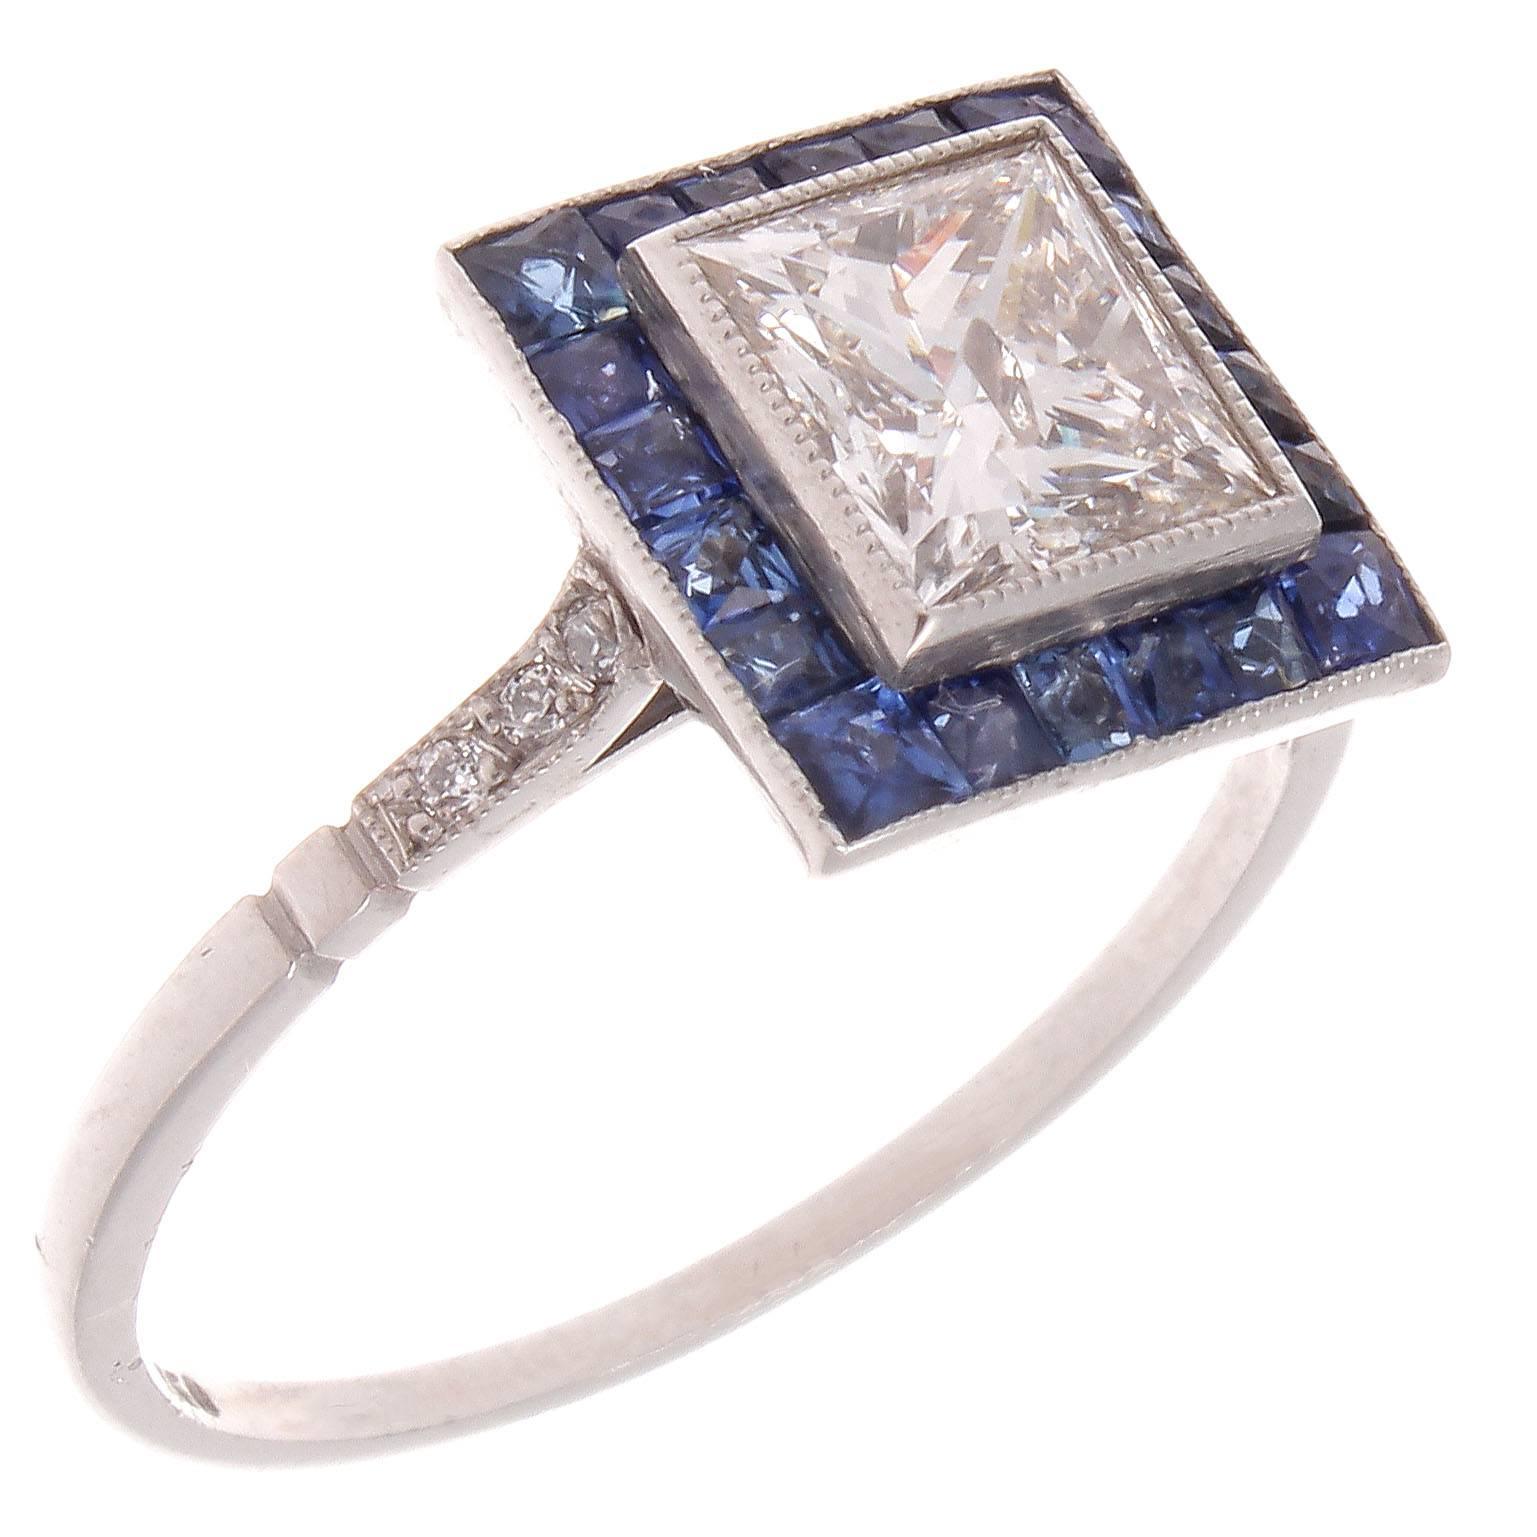 A modern rendition of the classic halo ring. Featuring a 1.13 carat princess cut diamonds that is F color, SI2 clarity surrounded by a halo of royal blue french cut sapphires. Crafted in plaitnum.

Ring size 7 1/2 and may easily be resized. 

